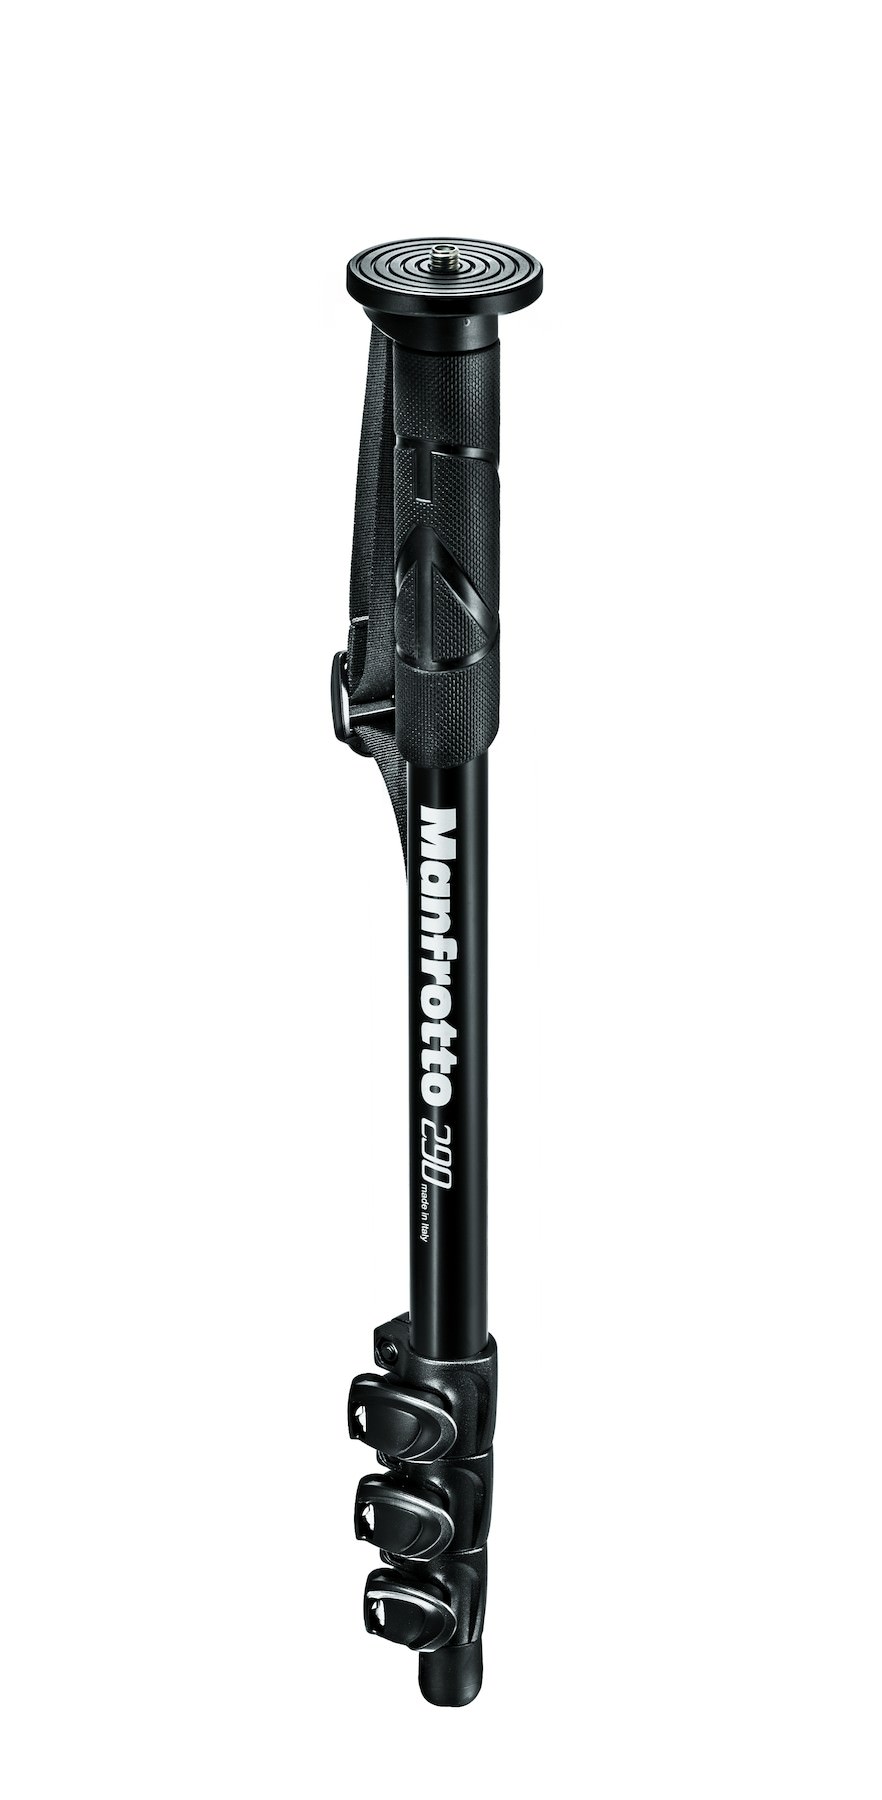 Manfrotto MM290A4 Monopod